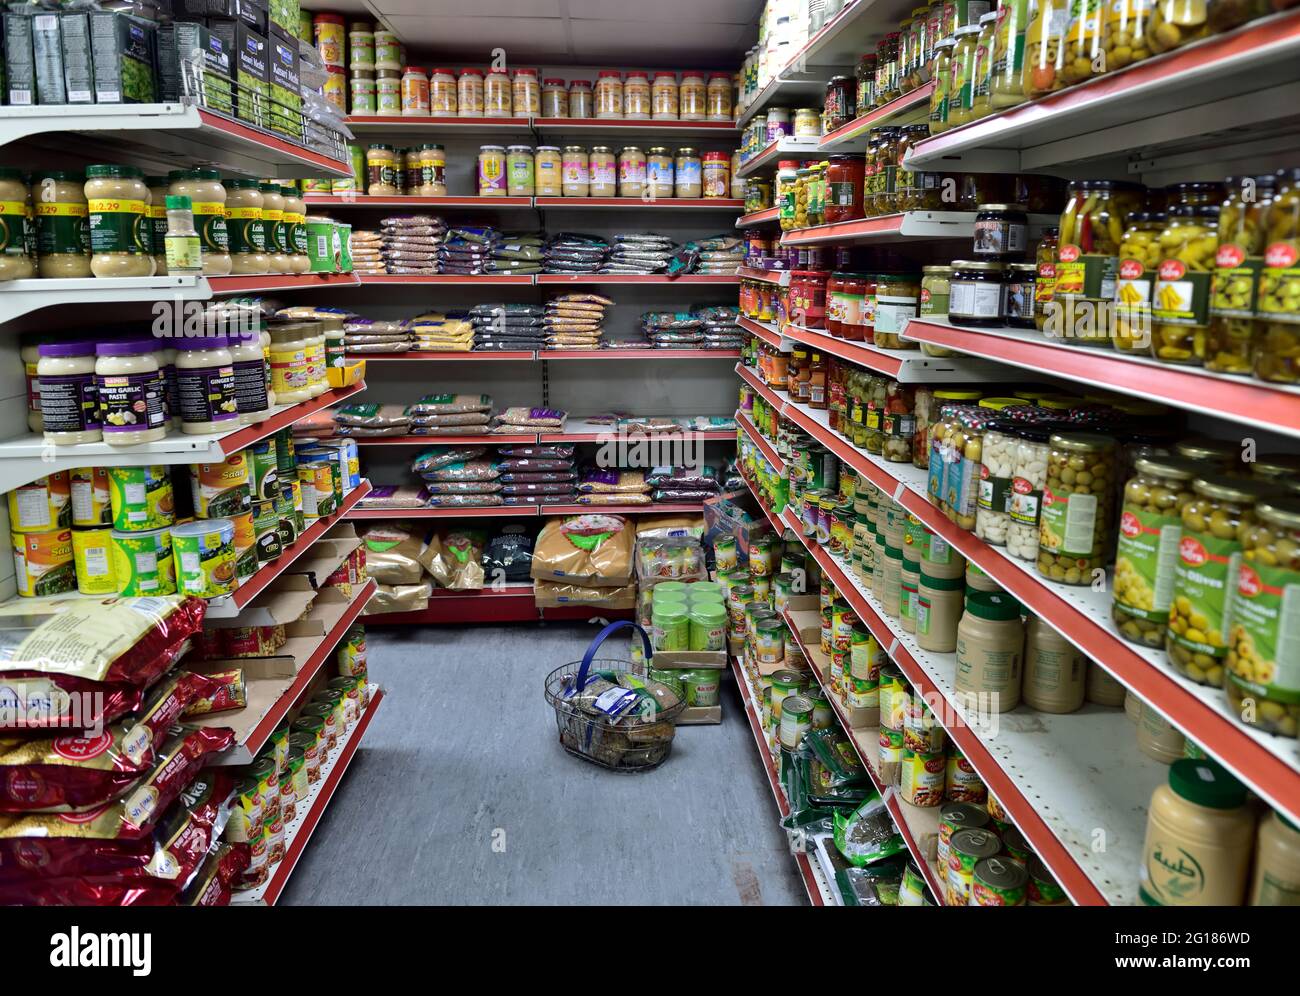 Shelves full of bags of dried pulses, lentils and other with jars and tins of food in small local well stocked corner grocery shop, UK Stock Photo